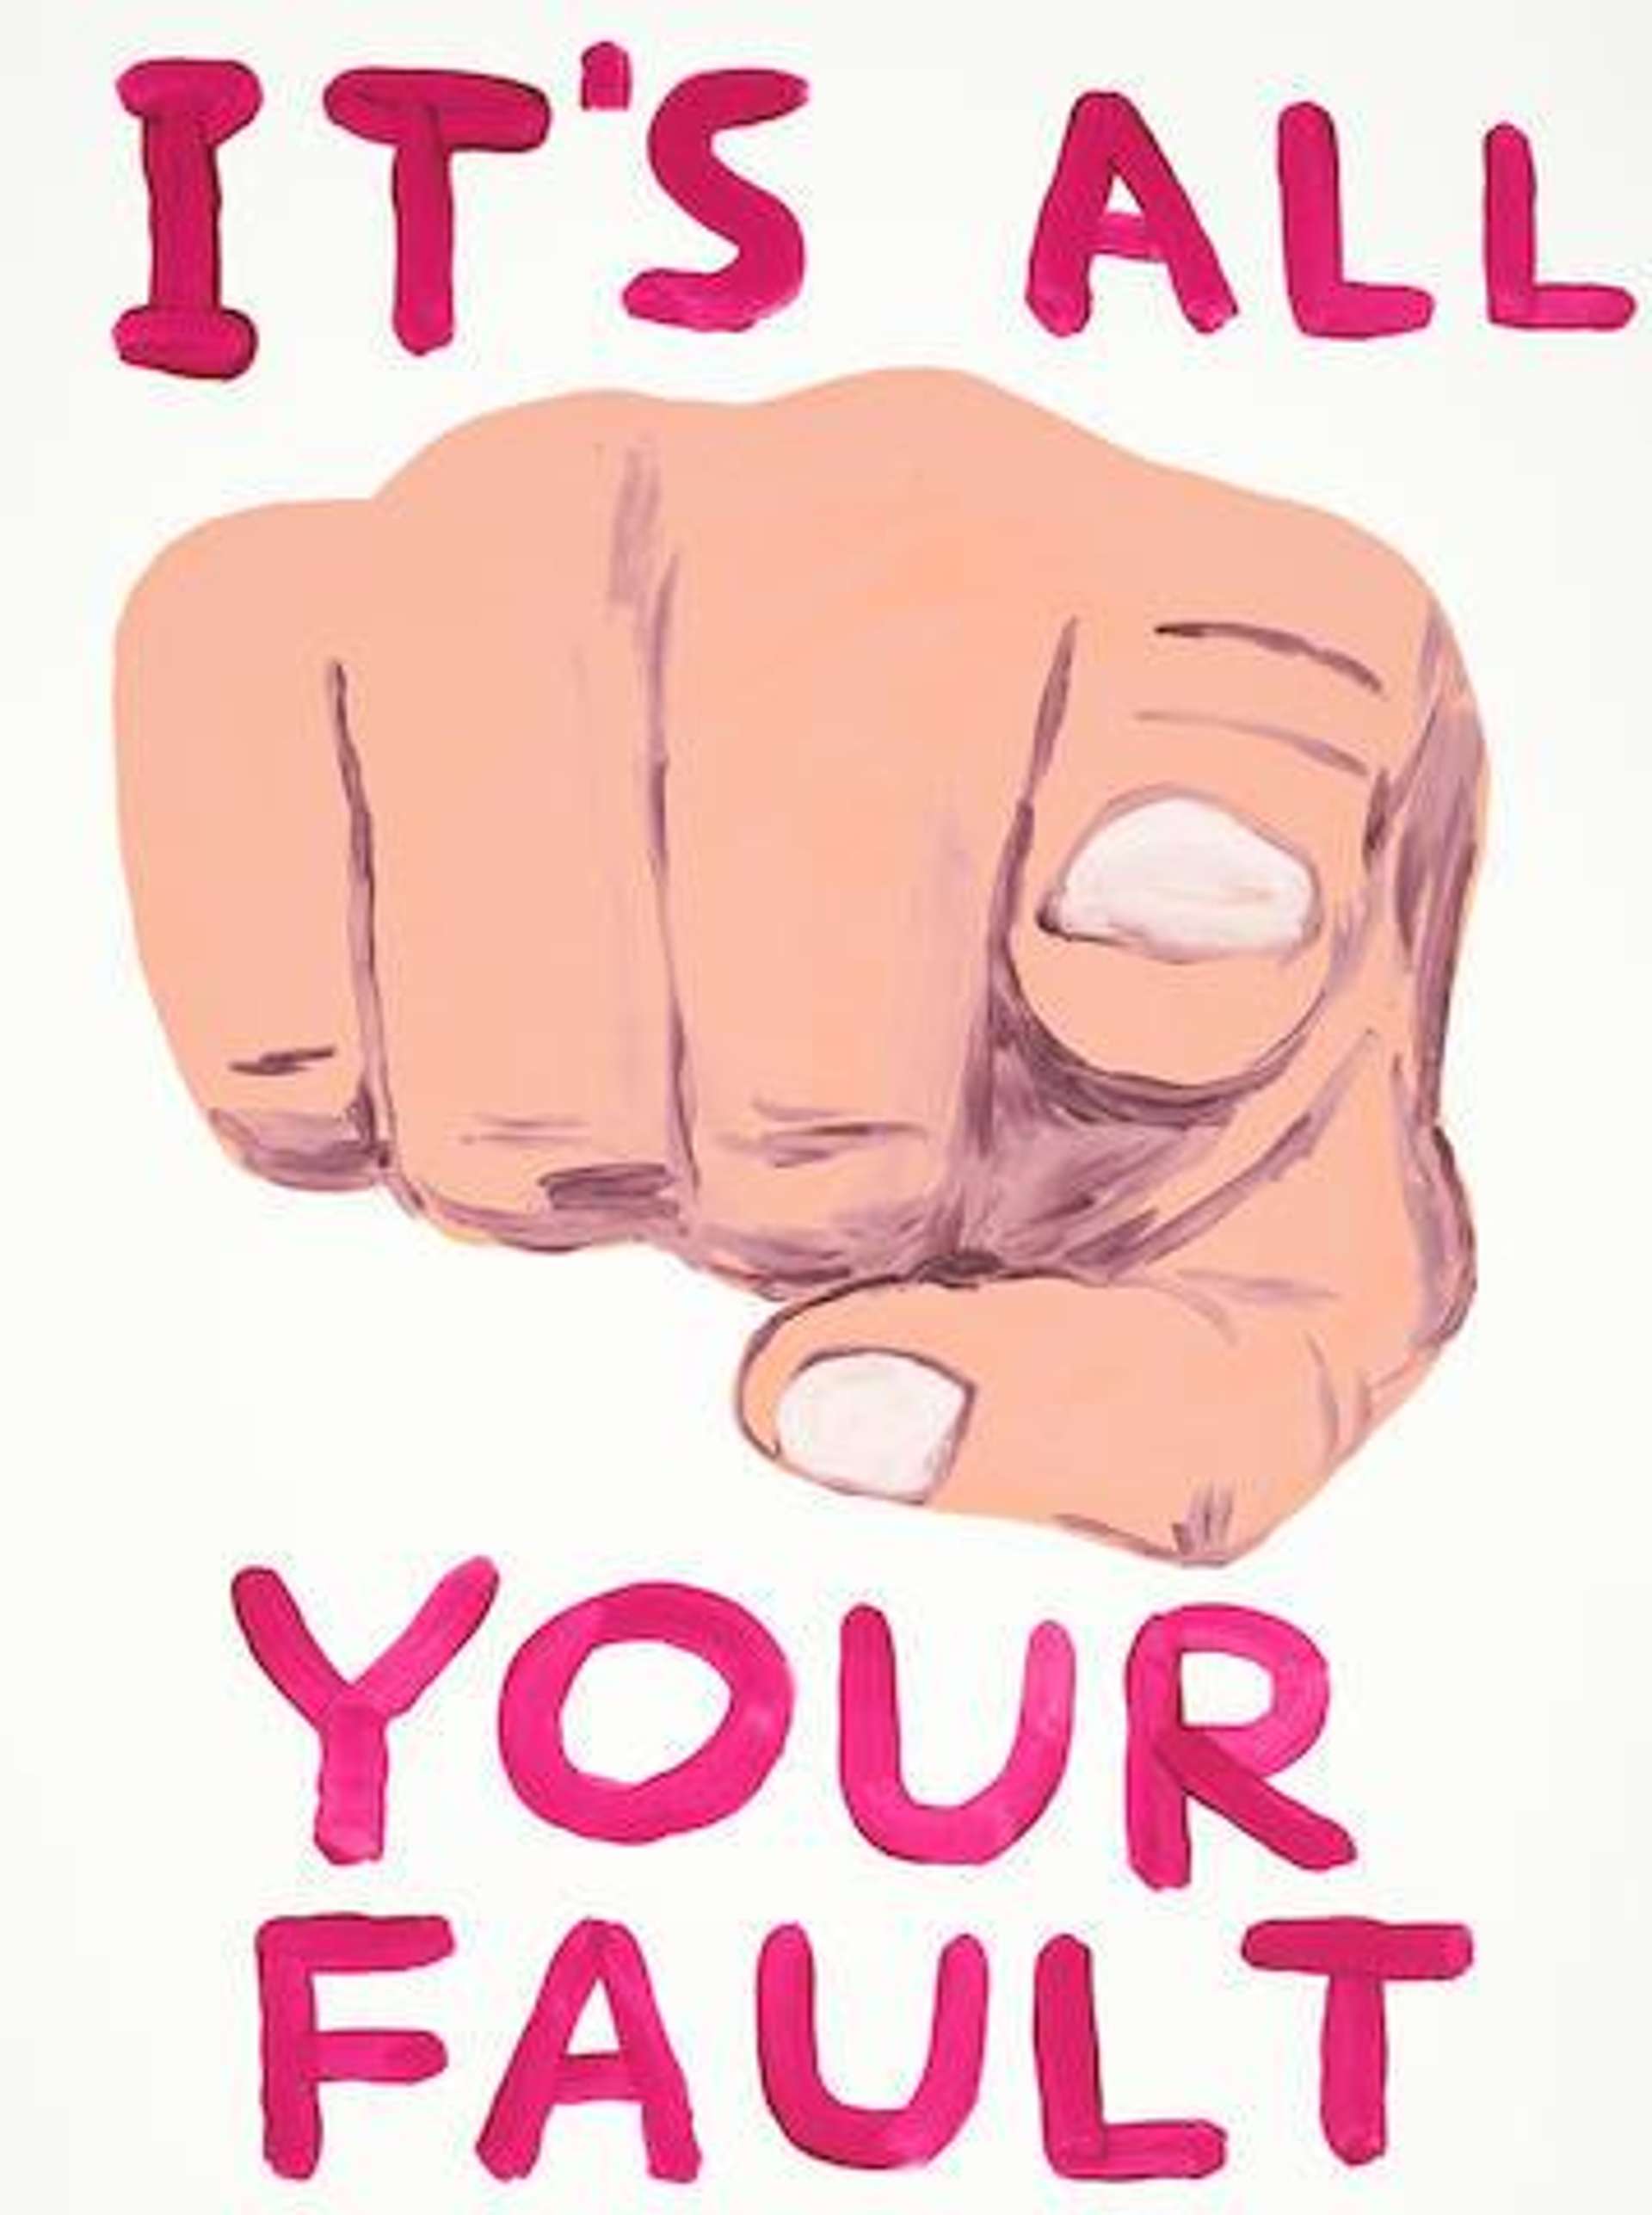 It's All Your Fault - Signed Print by David Shrigley 2019 - MyArtBroker